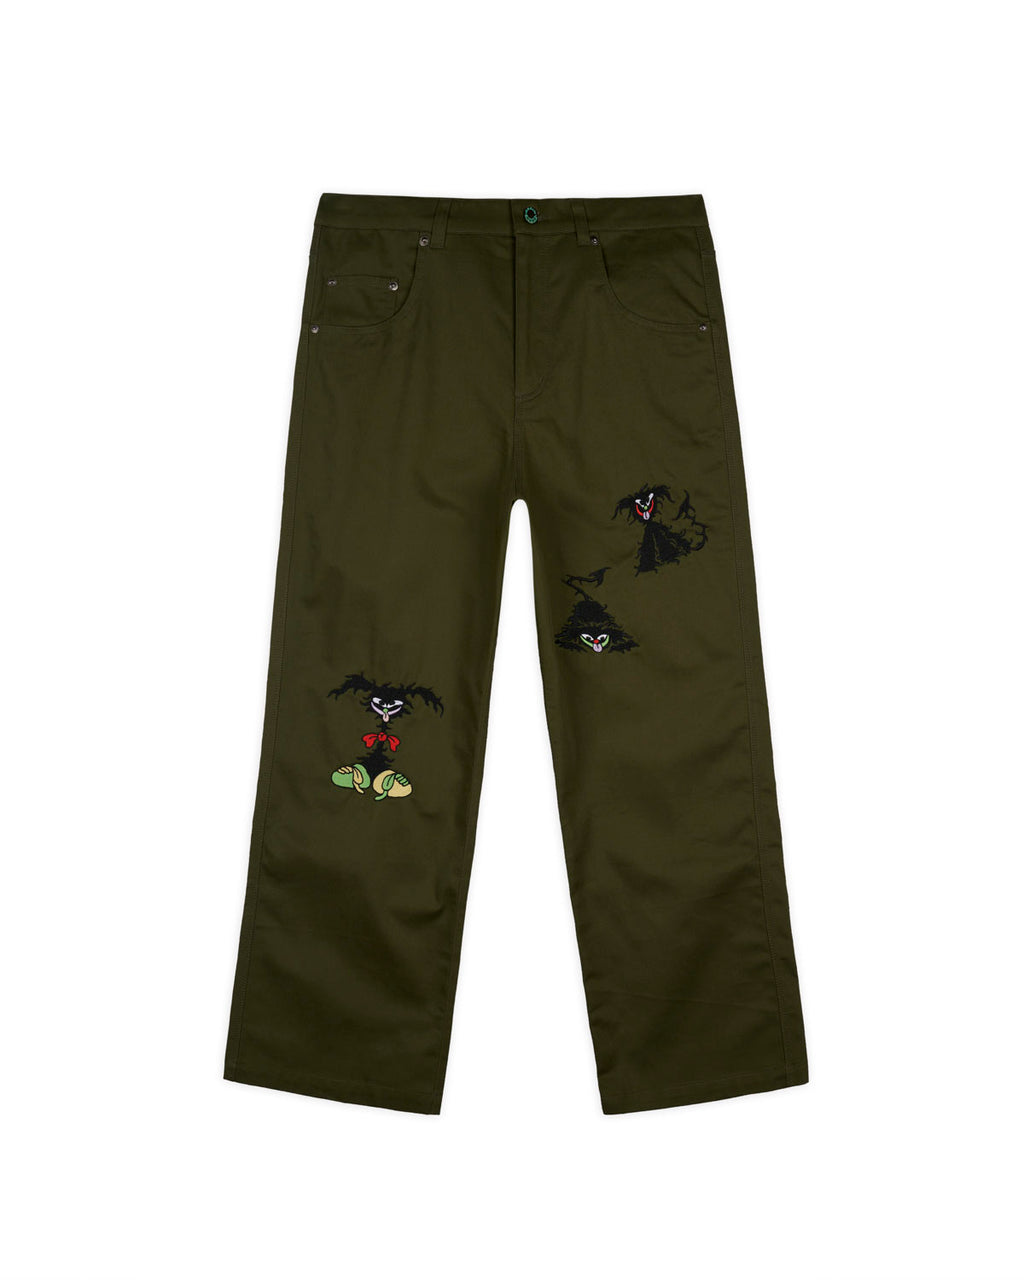 Twisted Snout Embroidered Pant, Olive